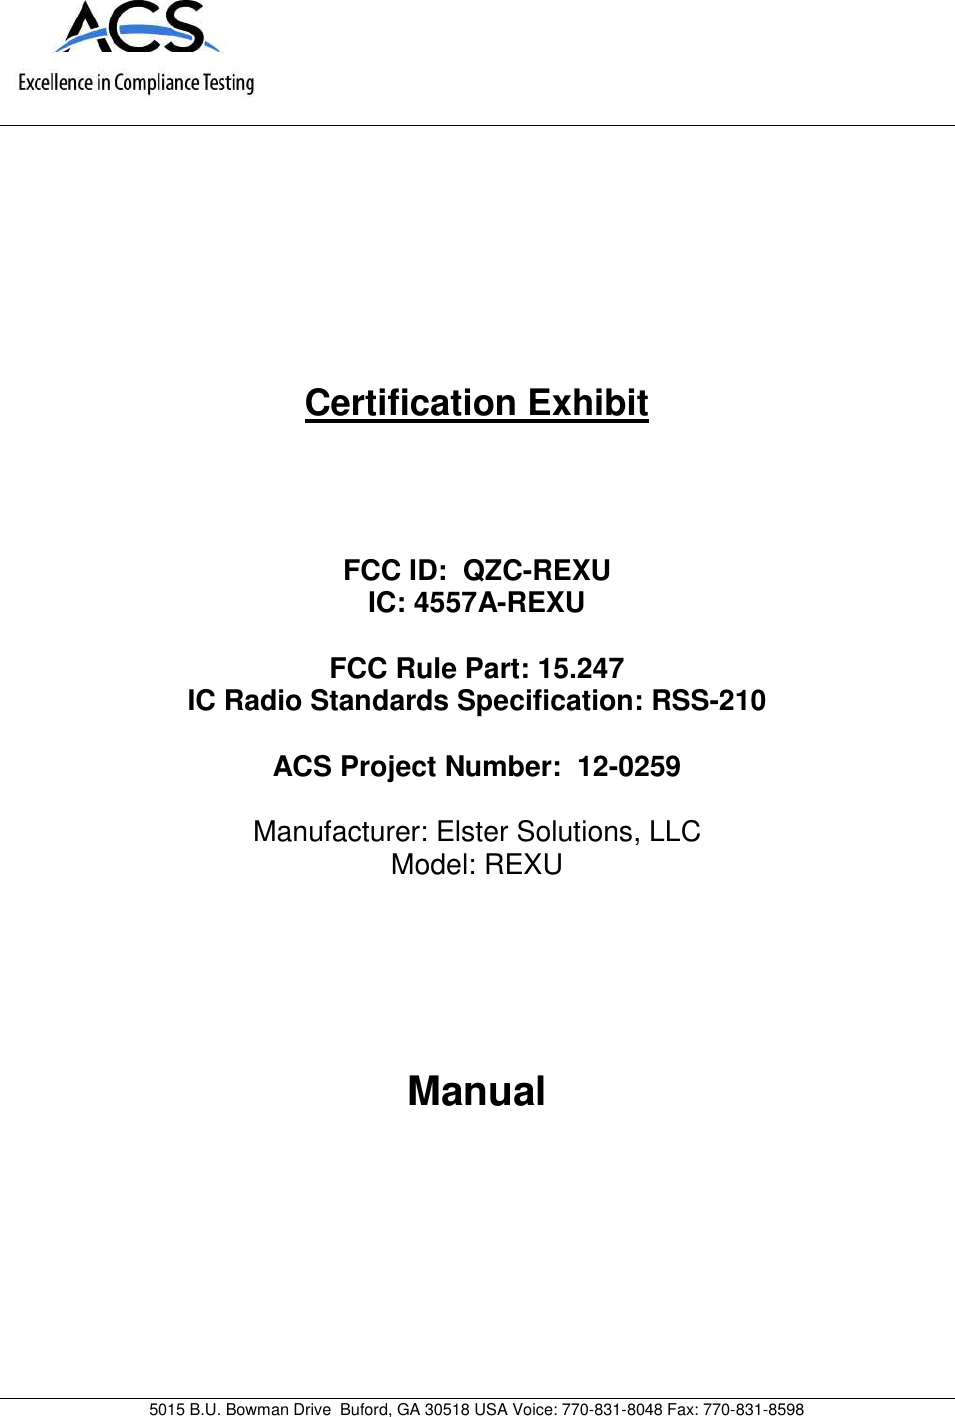 5015 B.U. Bowman Drive Buford, GA 30518 USA Voice: 770-831-8048 Fax: 770-831-8598Certification ExhibitFCC ID: QZC-REXUIC: 4557A-REXUFCC Rule Part: 15.247IC Radio Standards Specification: RSS-210ACS Project Number: 12-0259Manufacturer: Elster Solutions, LLCModel: REXUManual